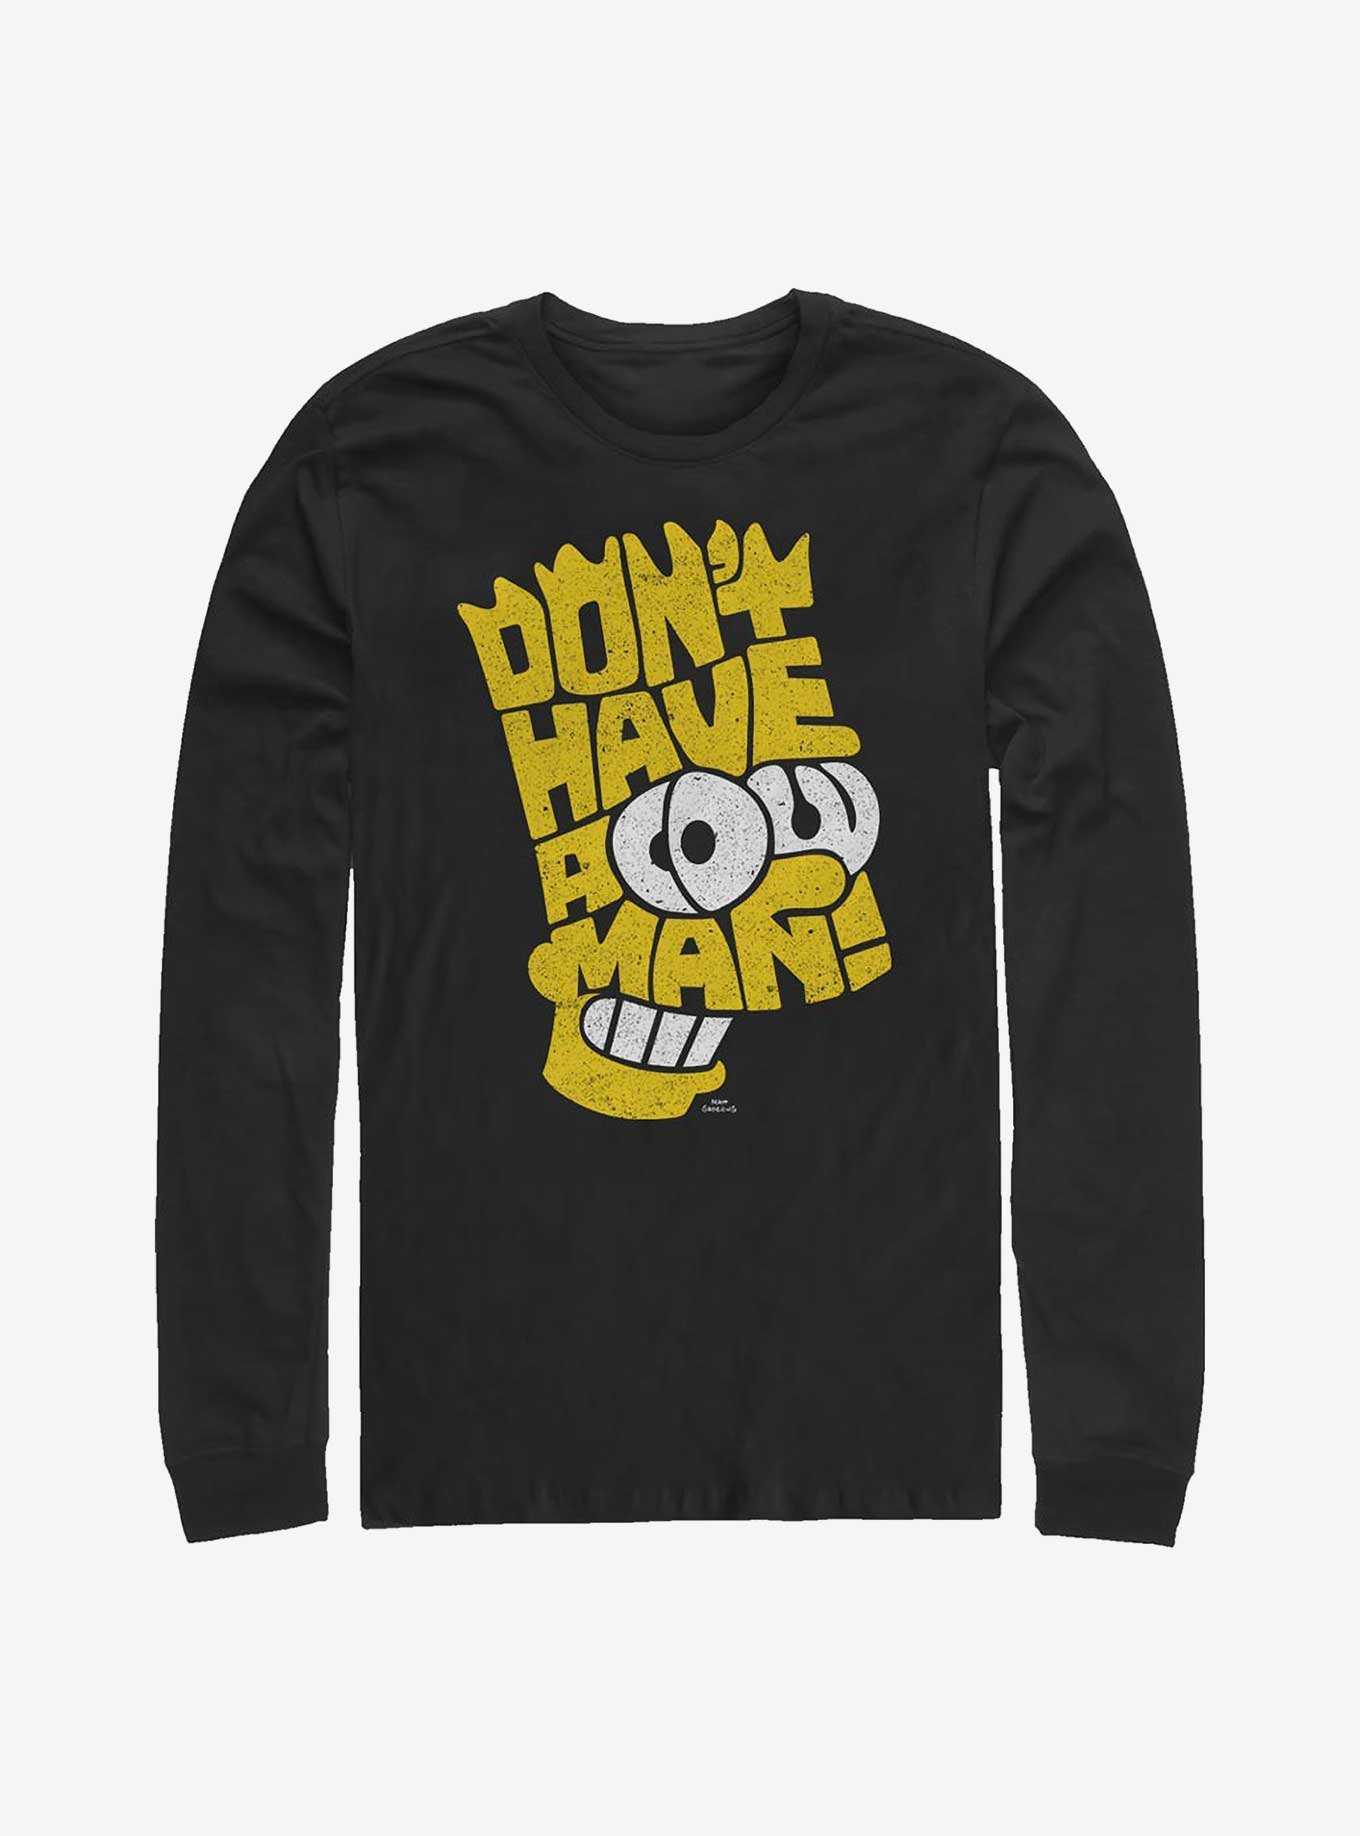 The Simpsons Bart Don't Have A Cow Man Long-Sleeve T-Shirt, , hi-res